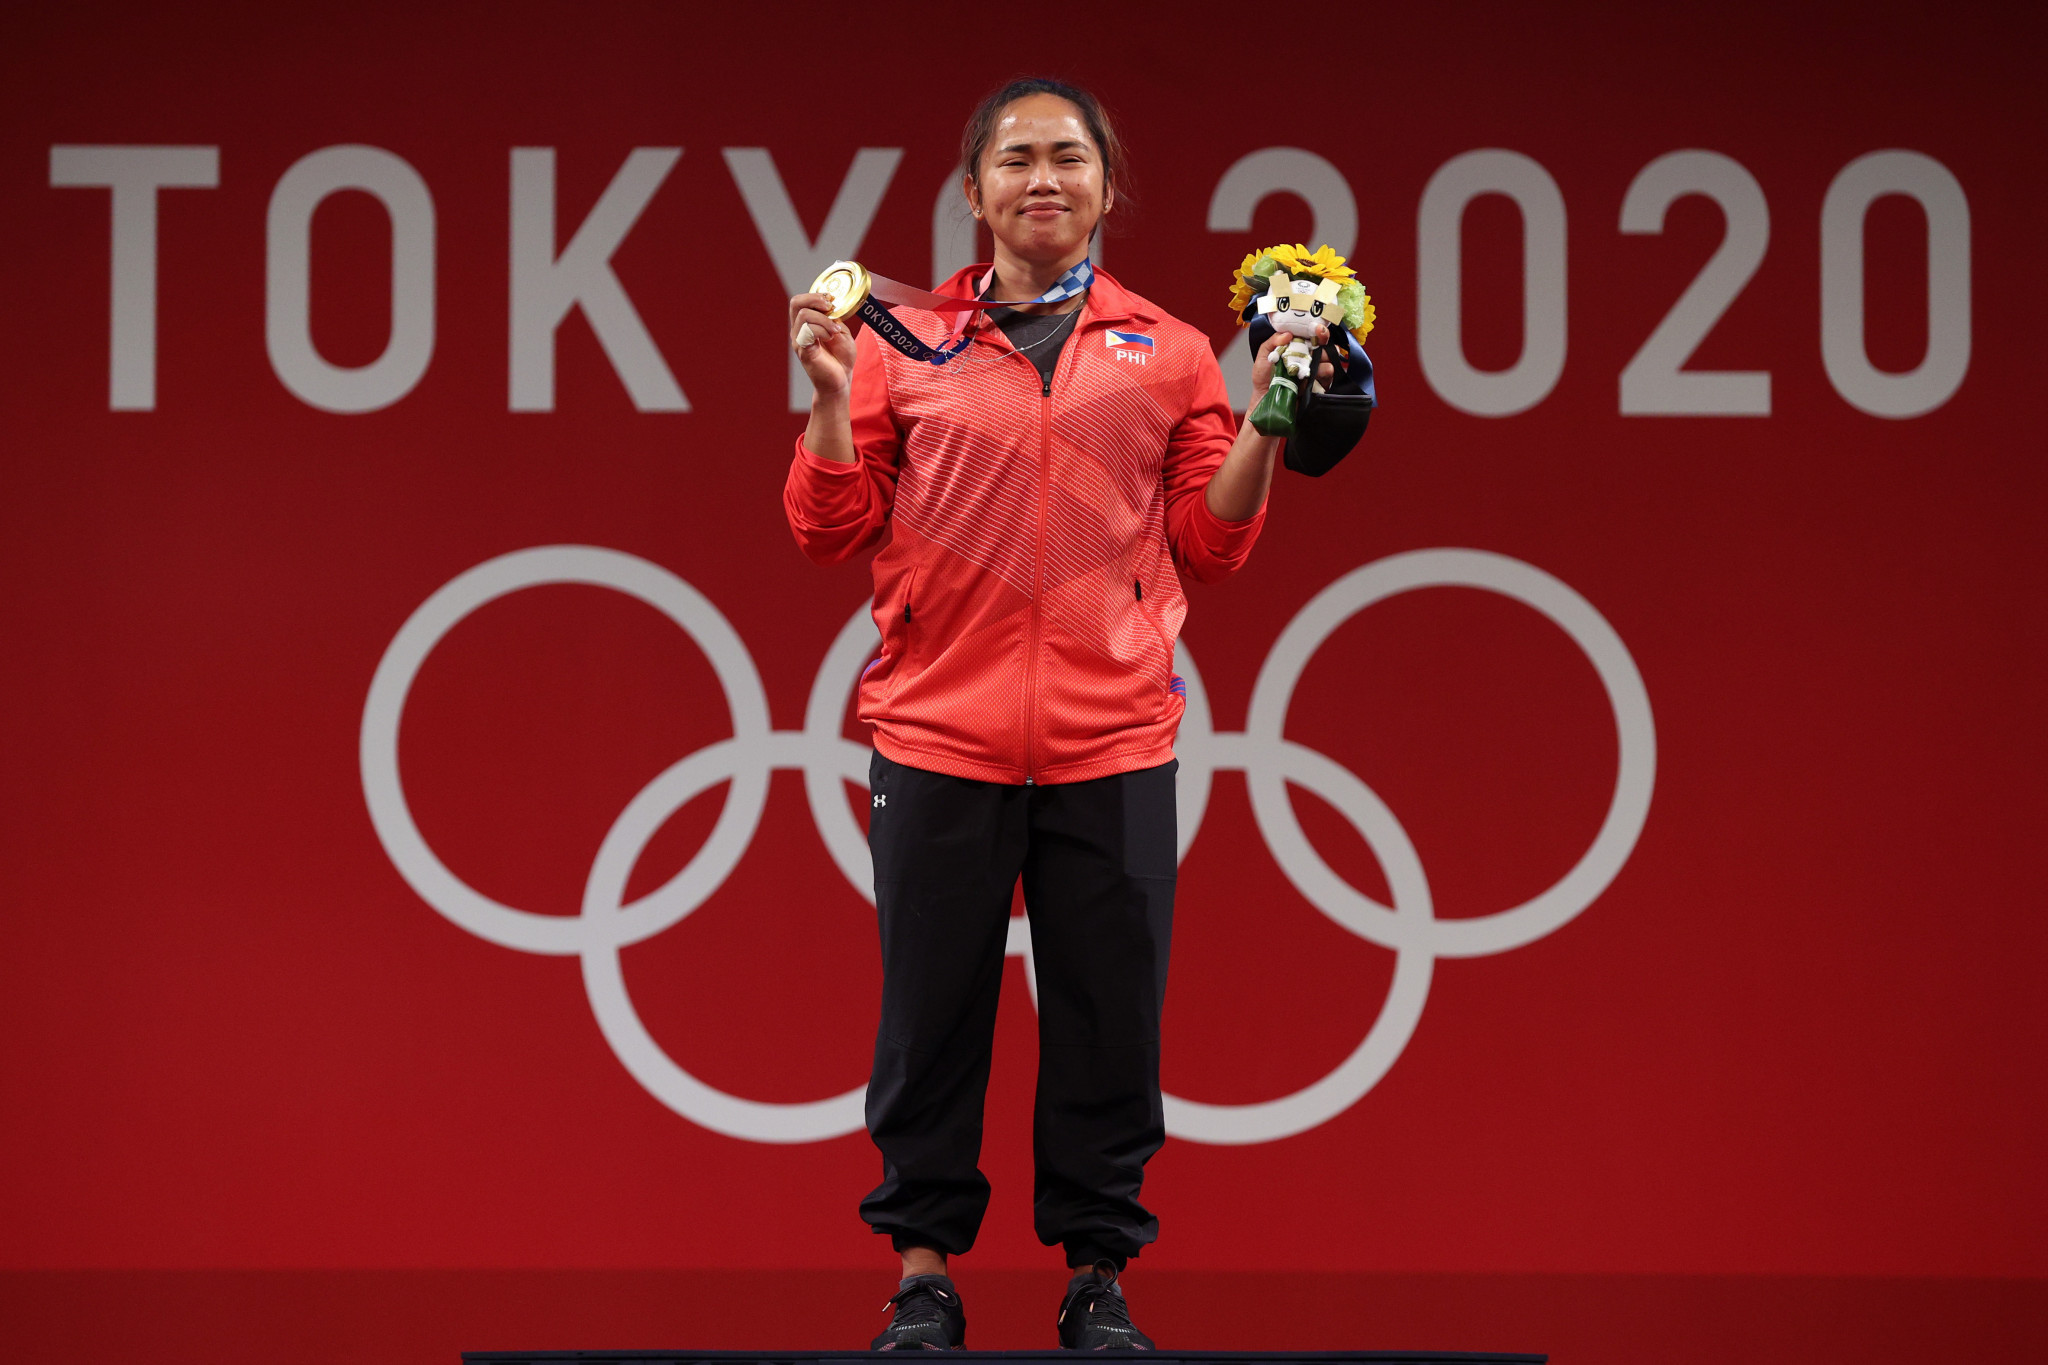 The Philippines' Hidilyn Diaz will have to change weight category from the 55kg gold medal she won at Tokyo 2020 ©Getty Images